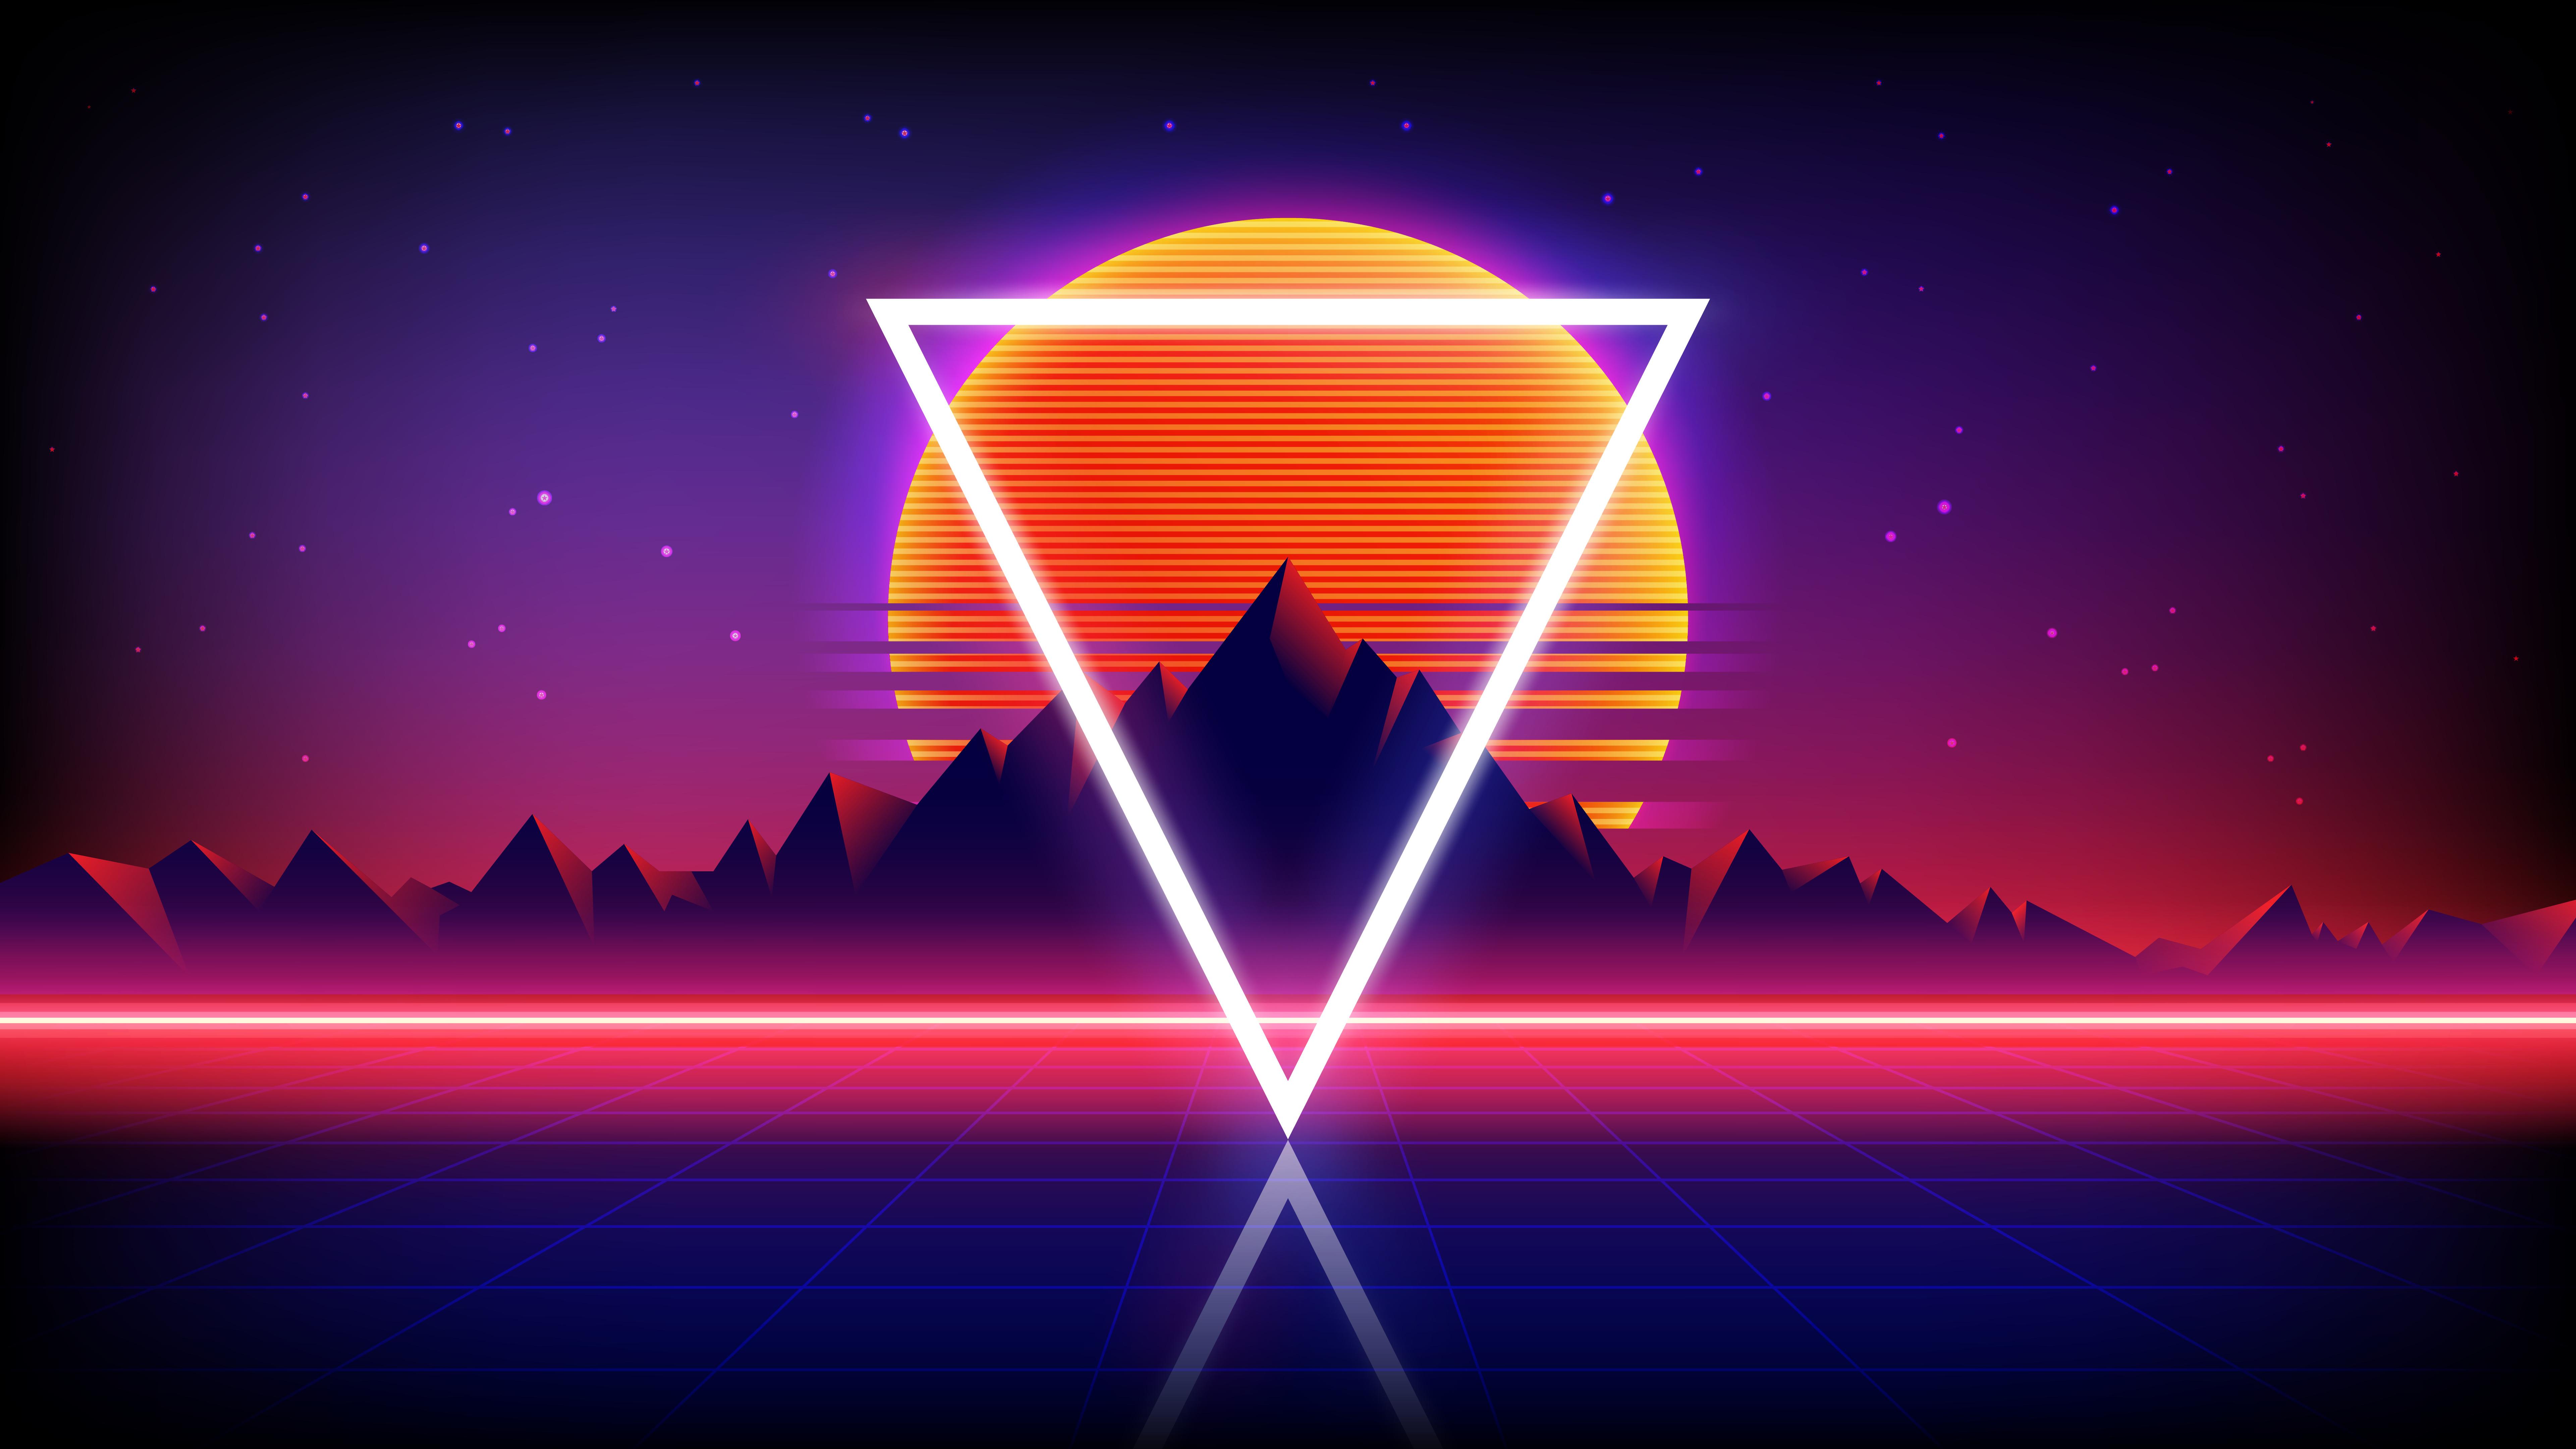 Retrowave Synthwave Abstract Sunset Wallpaper 4k 8k HD Pc 6101k